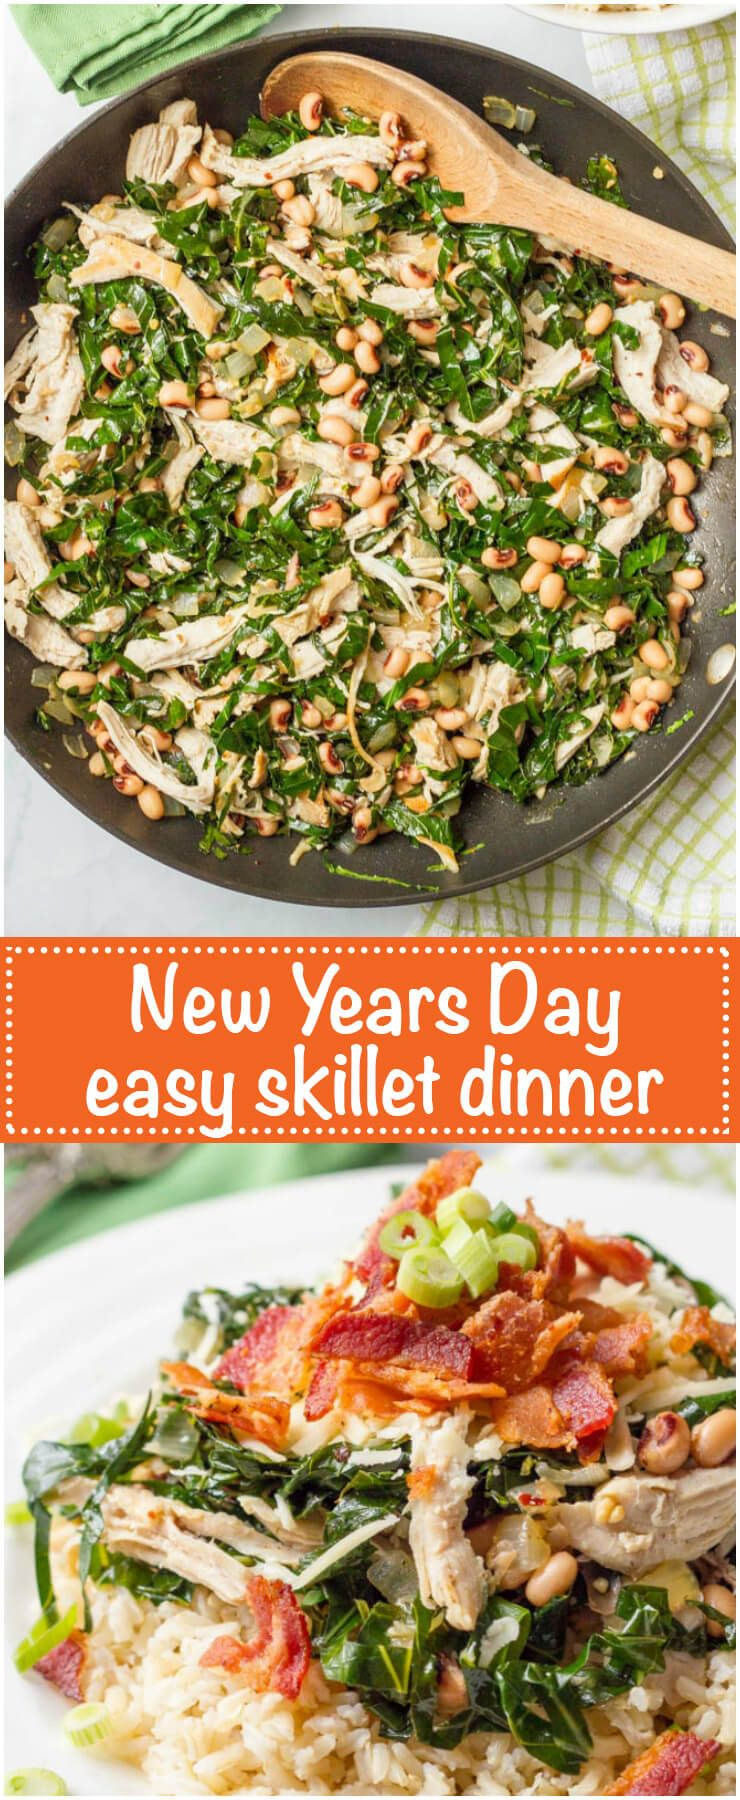 New Years Dinner Traditional
 Southern New Year s Day dinner skillet Recipe